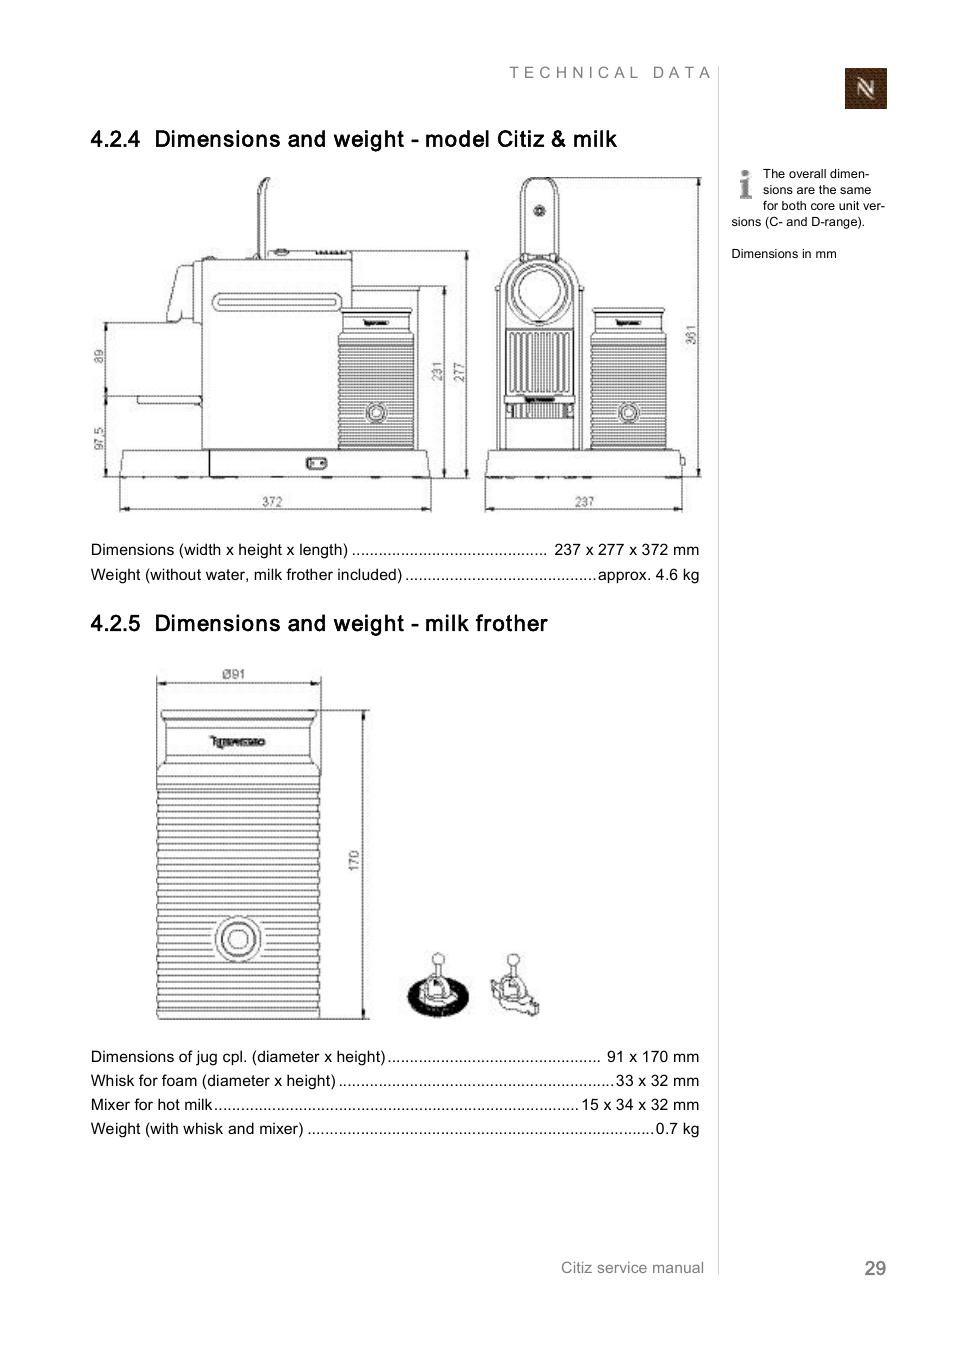 4 dimensions and weight model citiz & milk, 5 dimensions and weight milk  frother | Nespresso Citiz & Co EF 488 User Manual | Page 29 / 158 |  Original mode